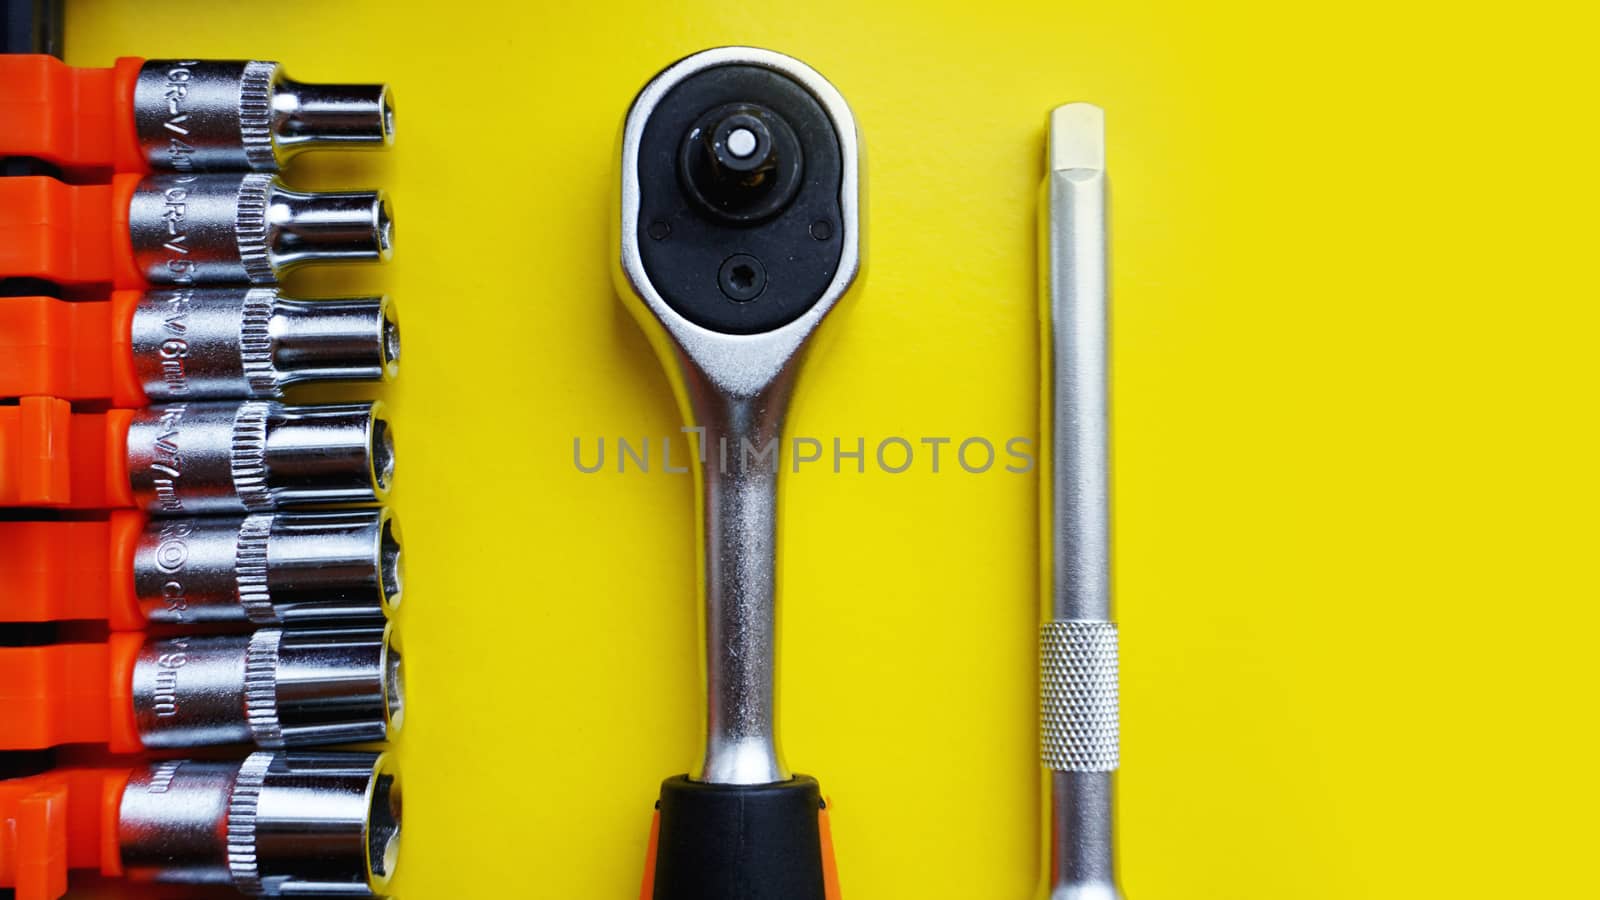 Wrench head bits for the screwdriver and other tools on bright yellow background, top view